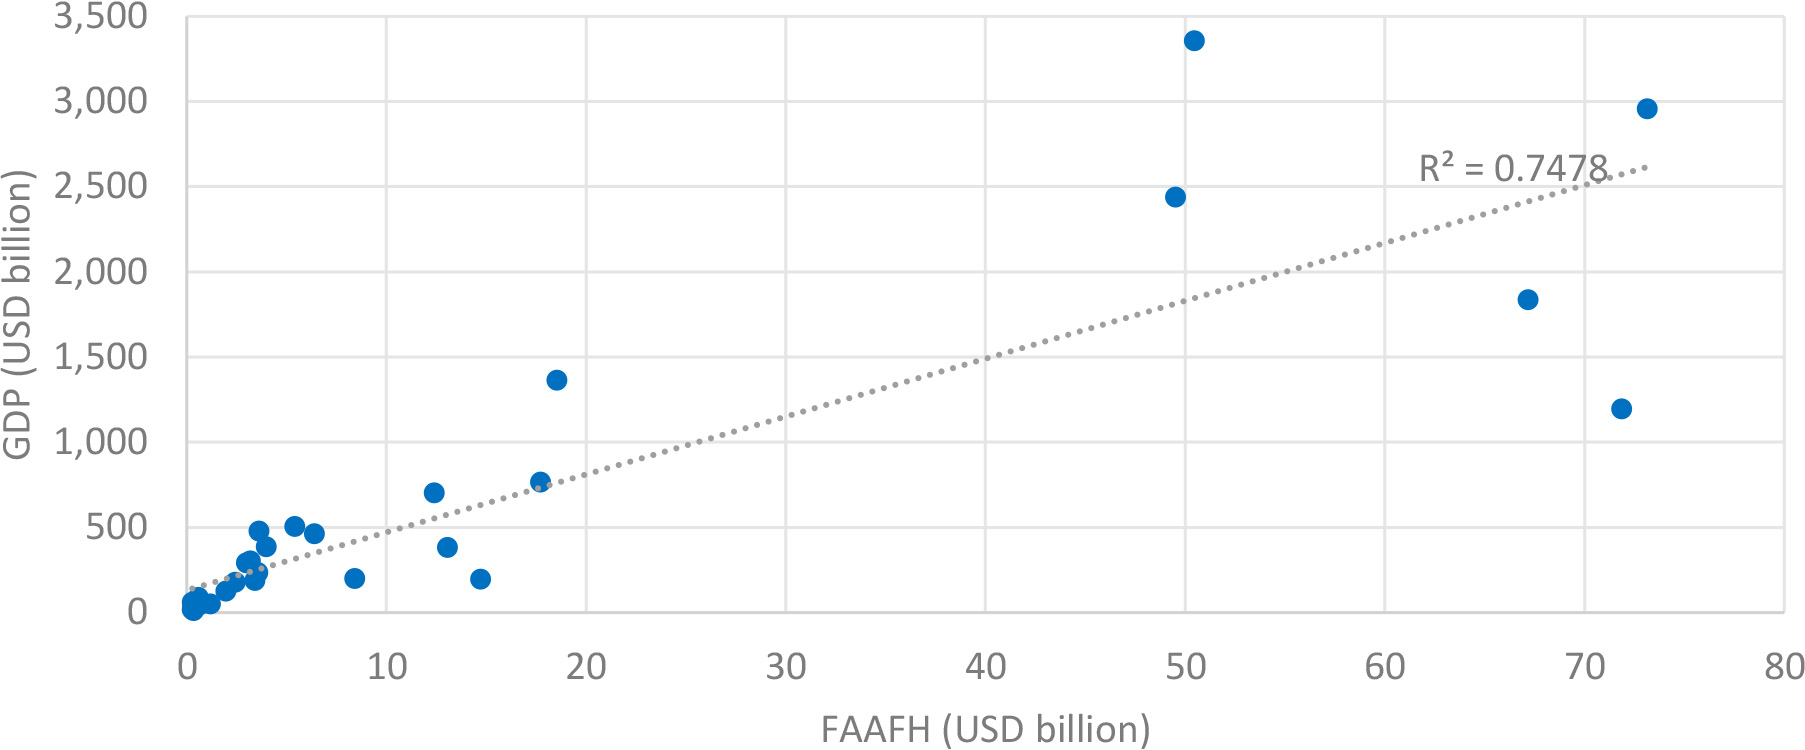 FAAFH compared to GDP for European countries (2015). Source: Author’s own elaboration.